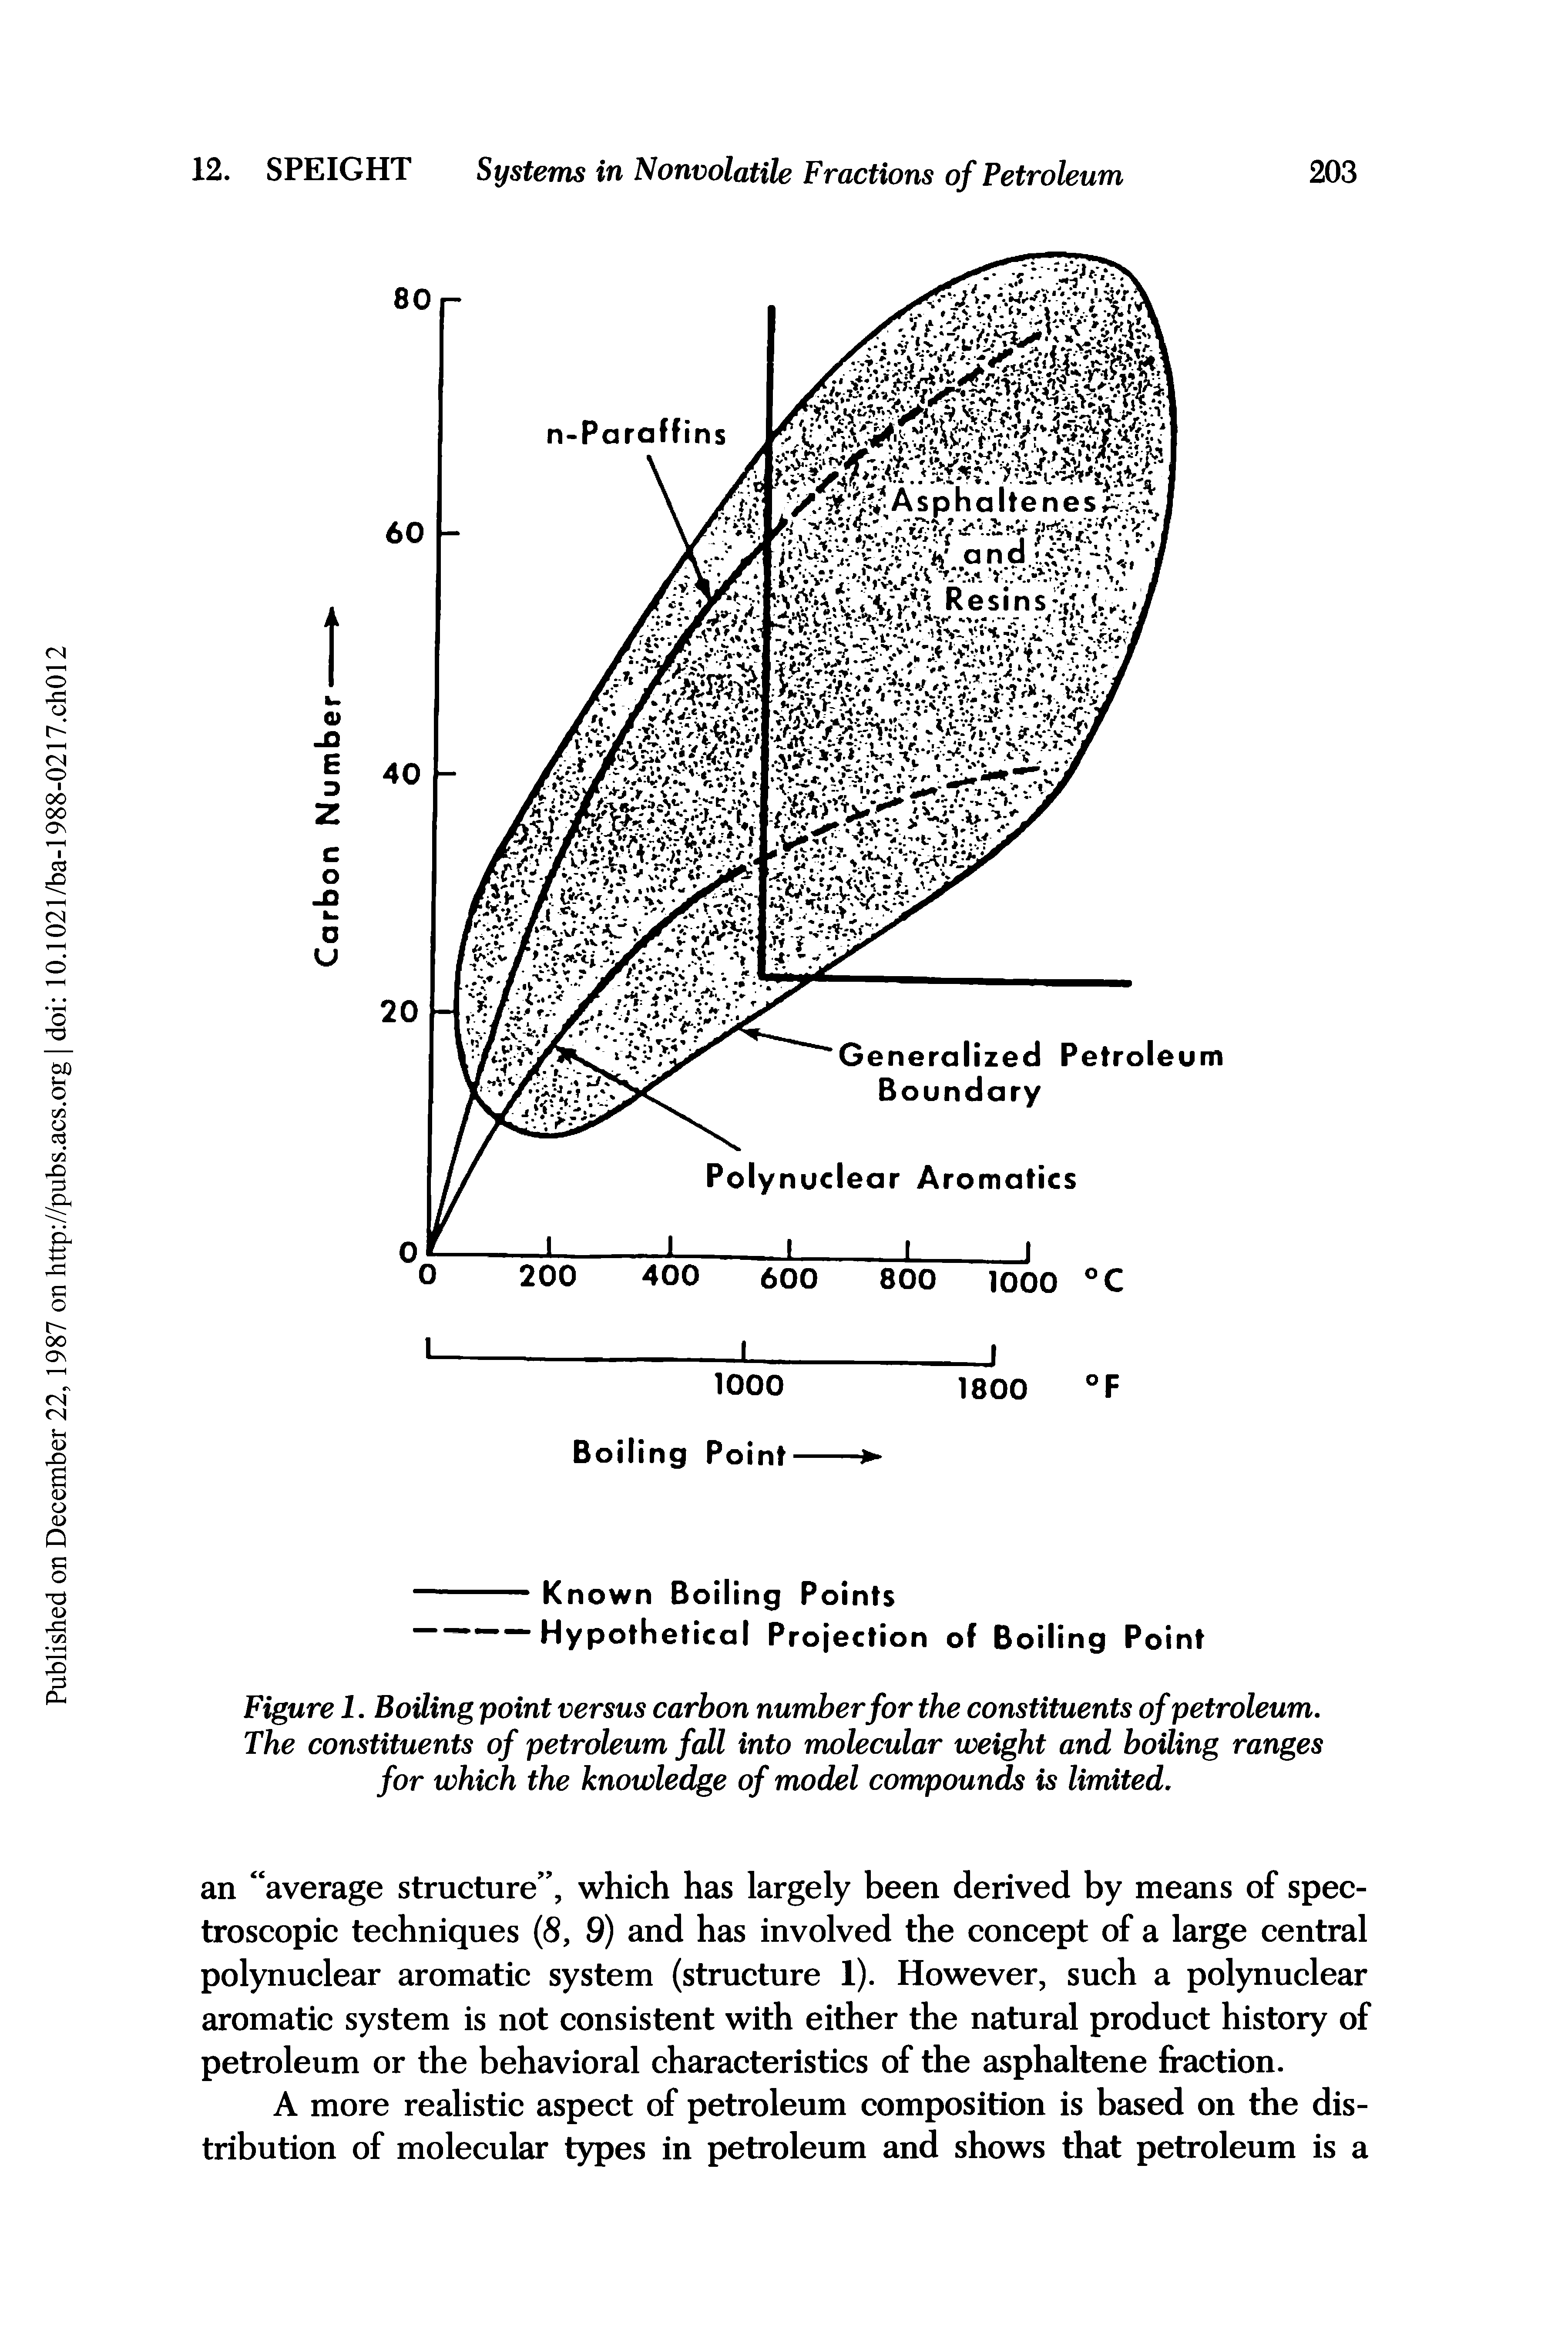 Figure 1. Boiling point versus carbon number for the constituents of petroleum. The constituents of petroleum fall into molecular weight and boiling ranges for which the knowledge of model compounds is limited.